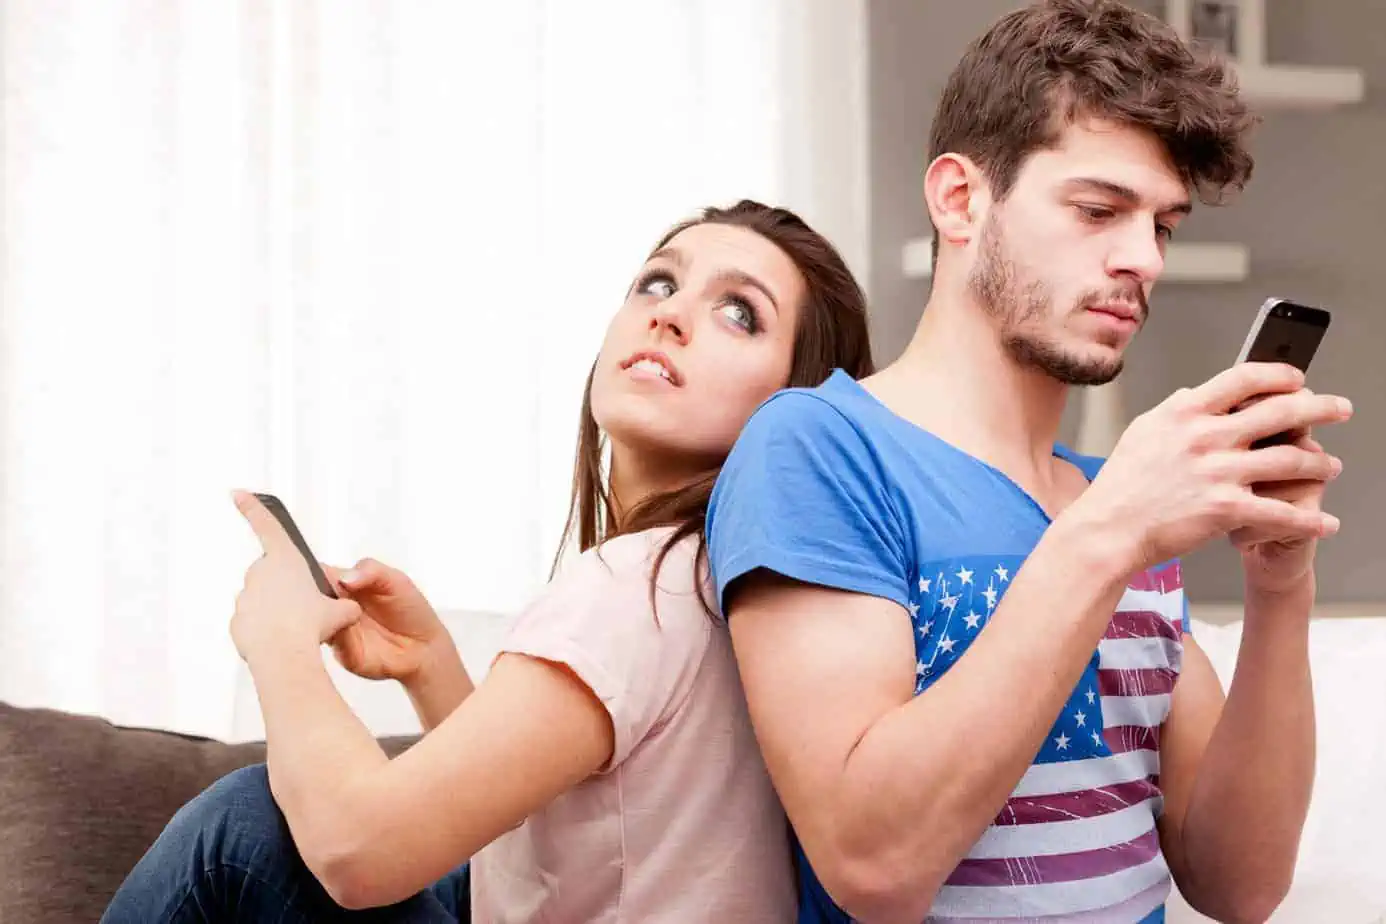 A man and woman sitting on a couch looking at a cell phone